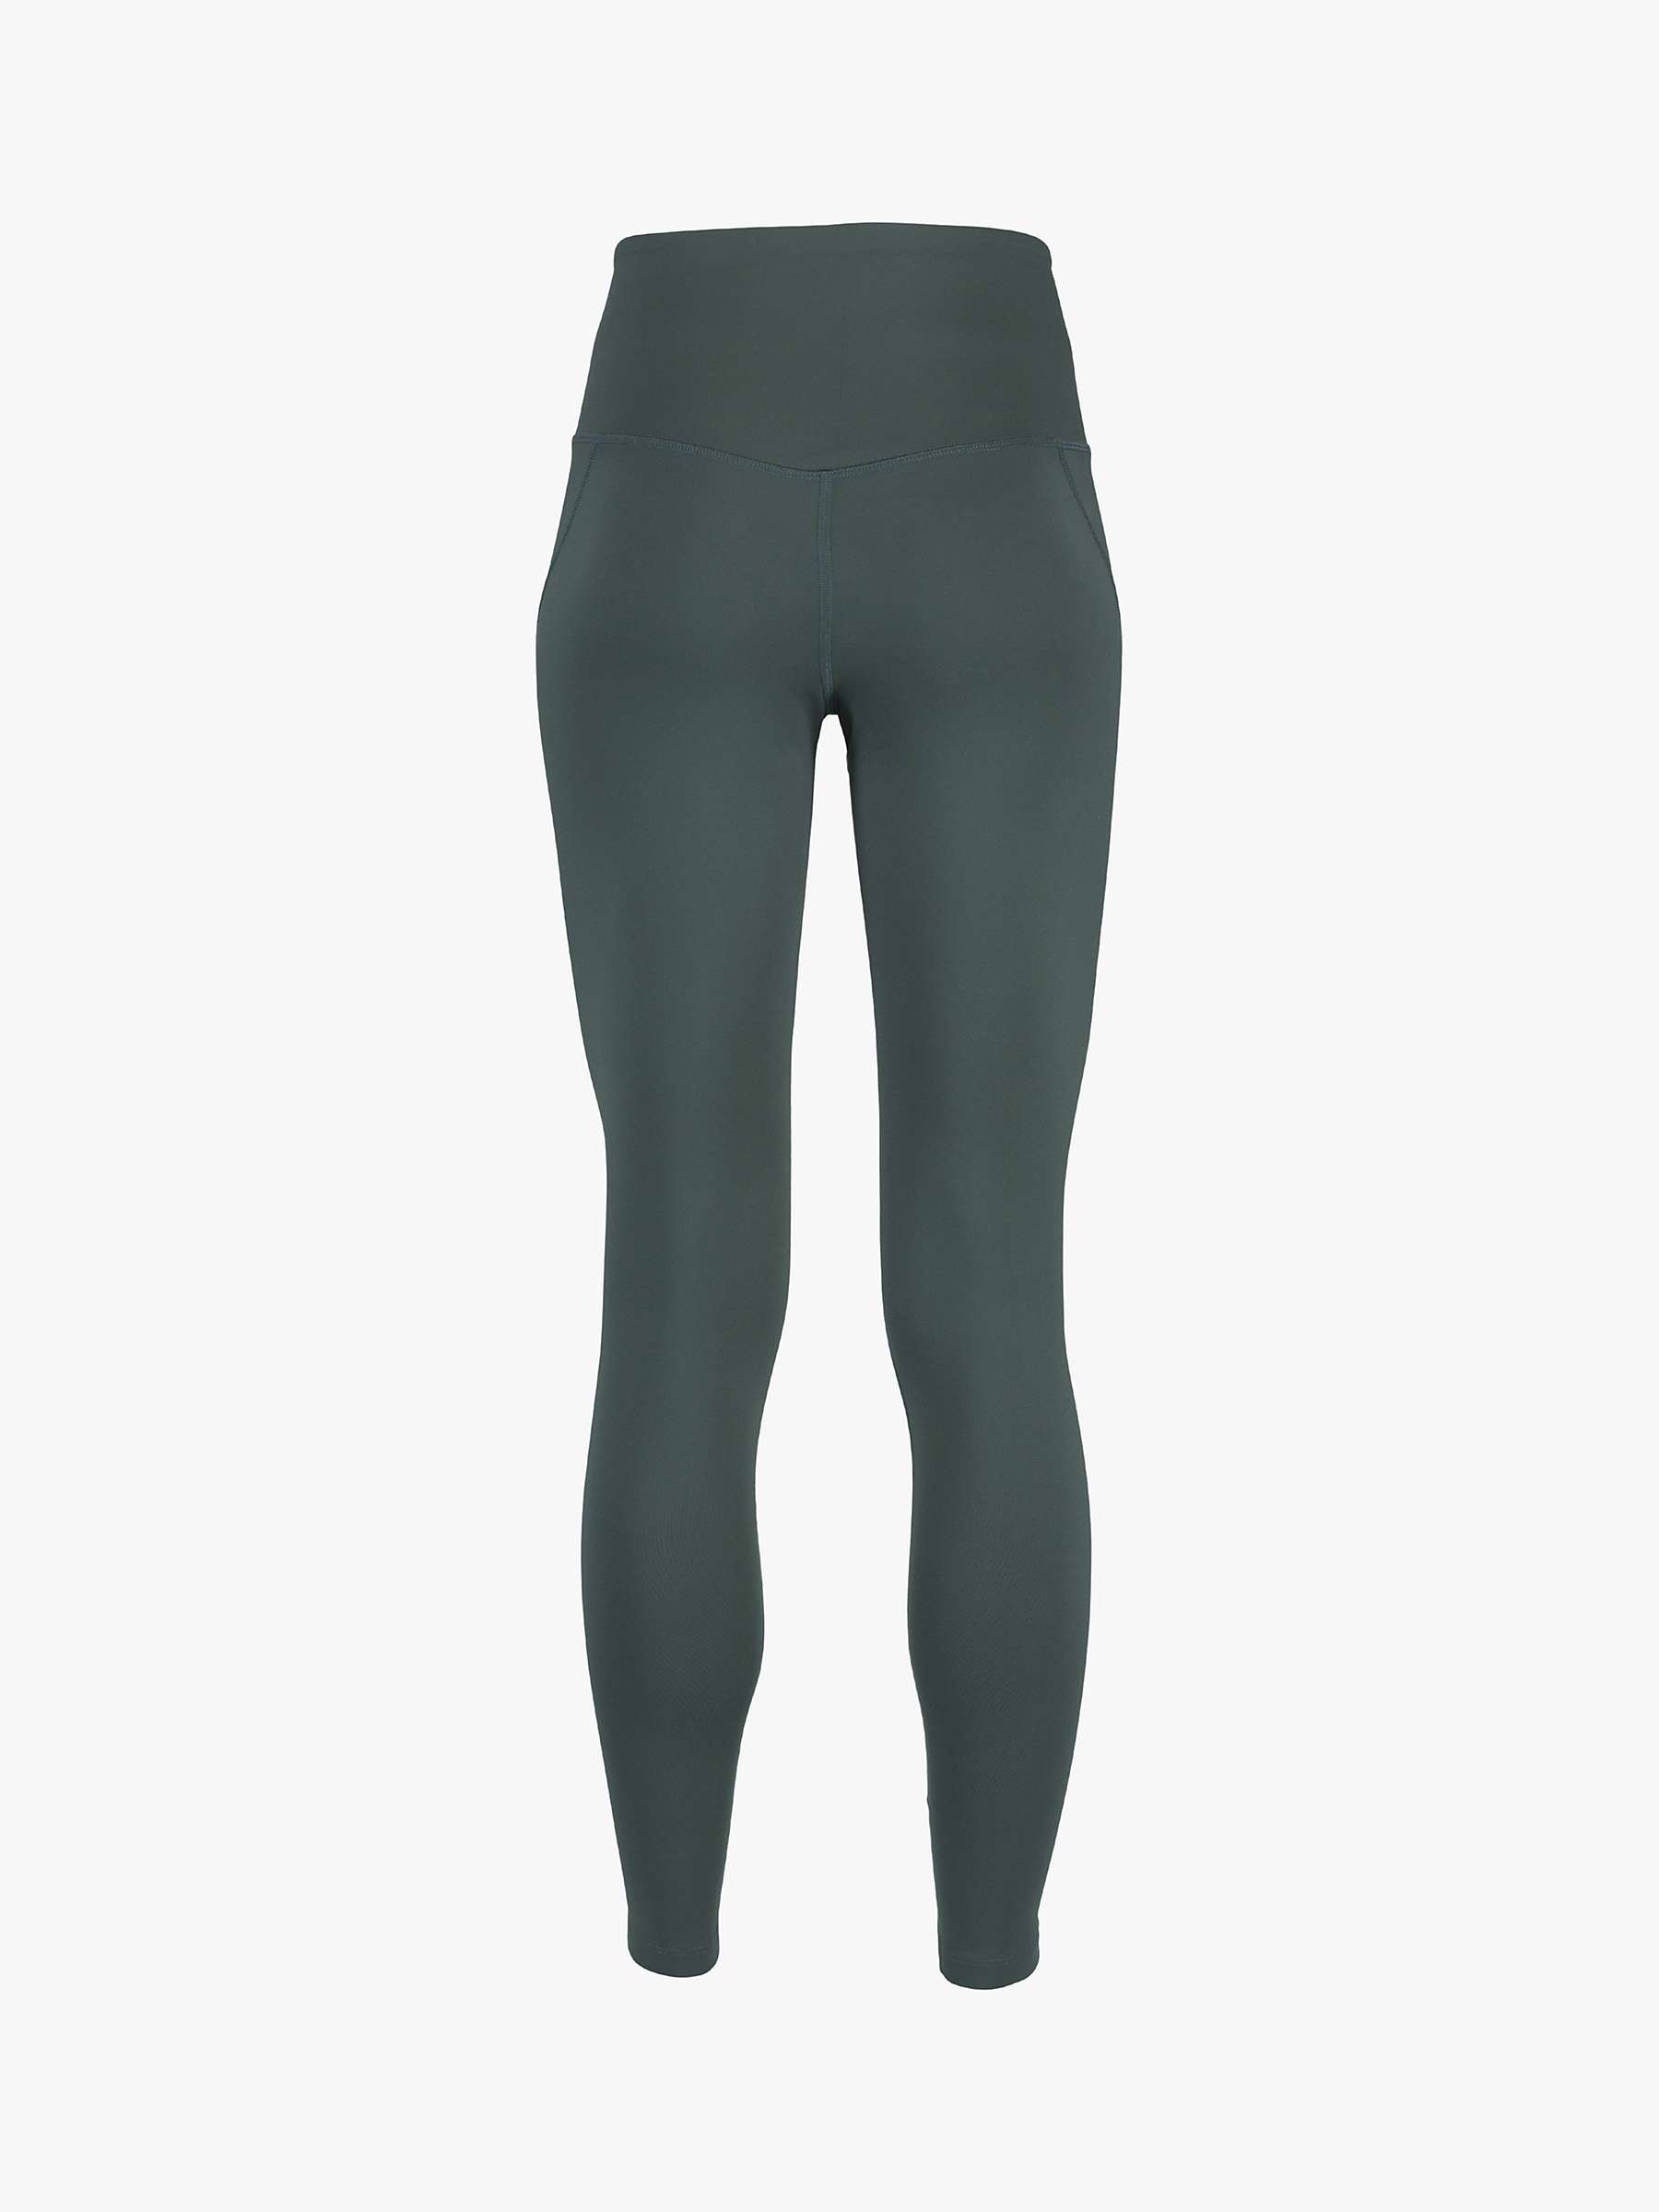 Buy Girlfriend Collective Compressive High Rise Full Length Leggings Online at johnlewis.com